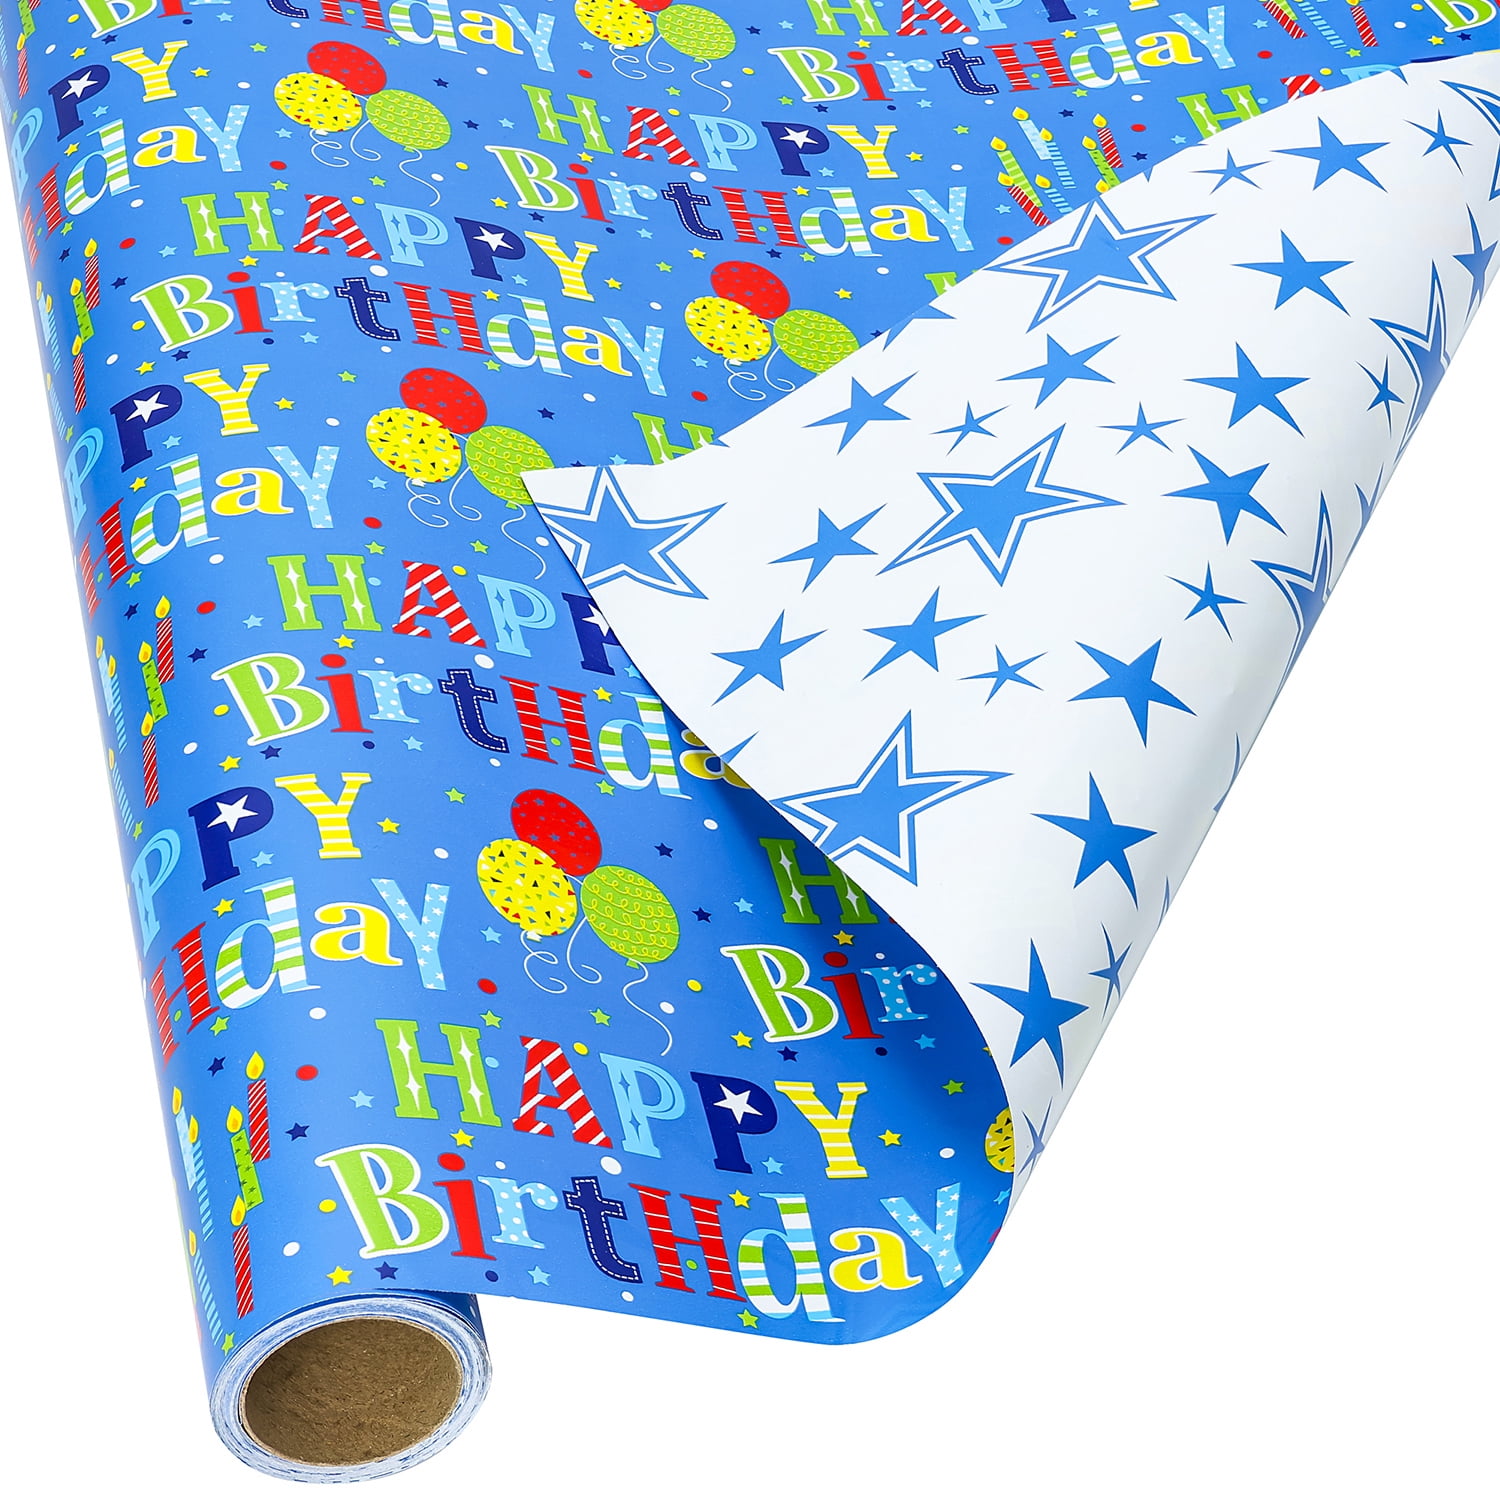 Unique Giraffe Wrapping Paper Baby Shower Wrapping Paper Neutral Wrapping  Paper Baby Wrapping Paper Birthday Wrapping Paper 